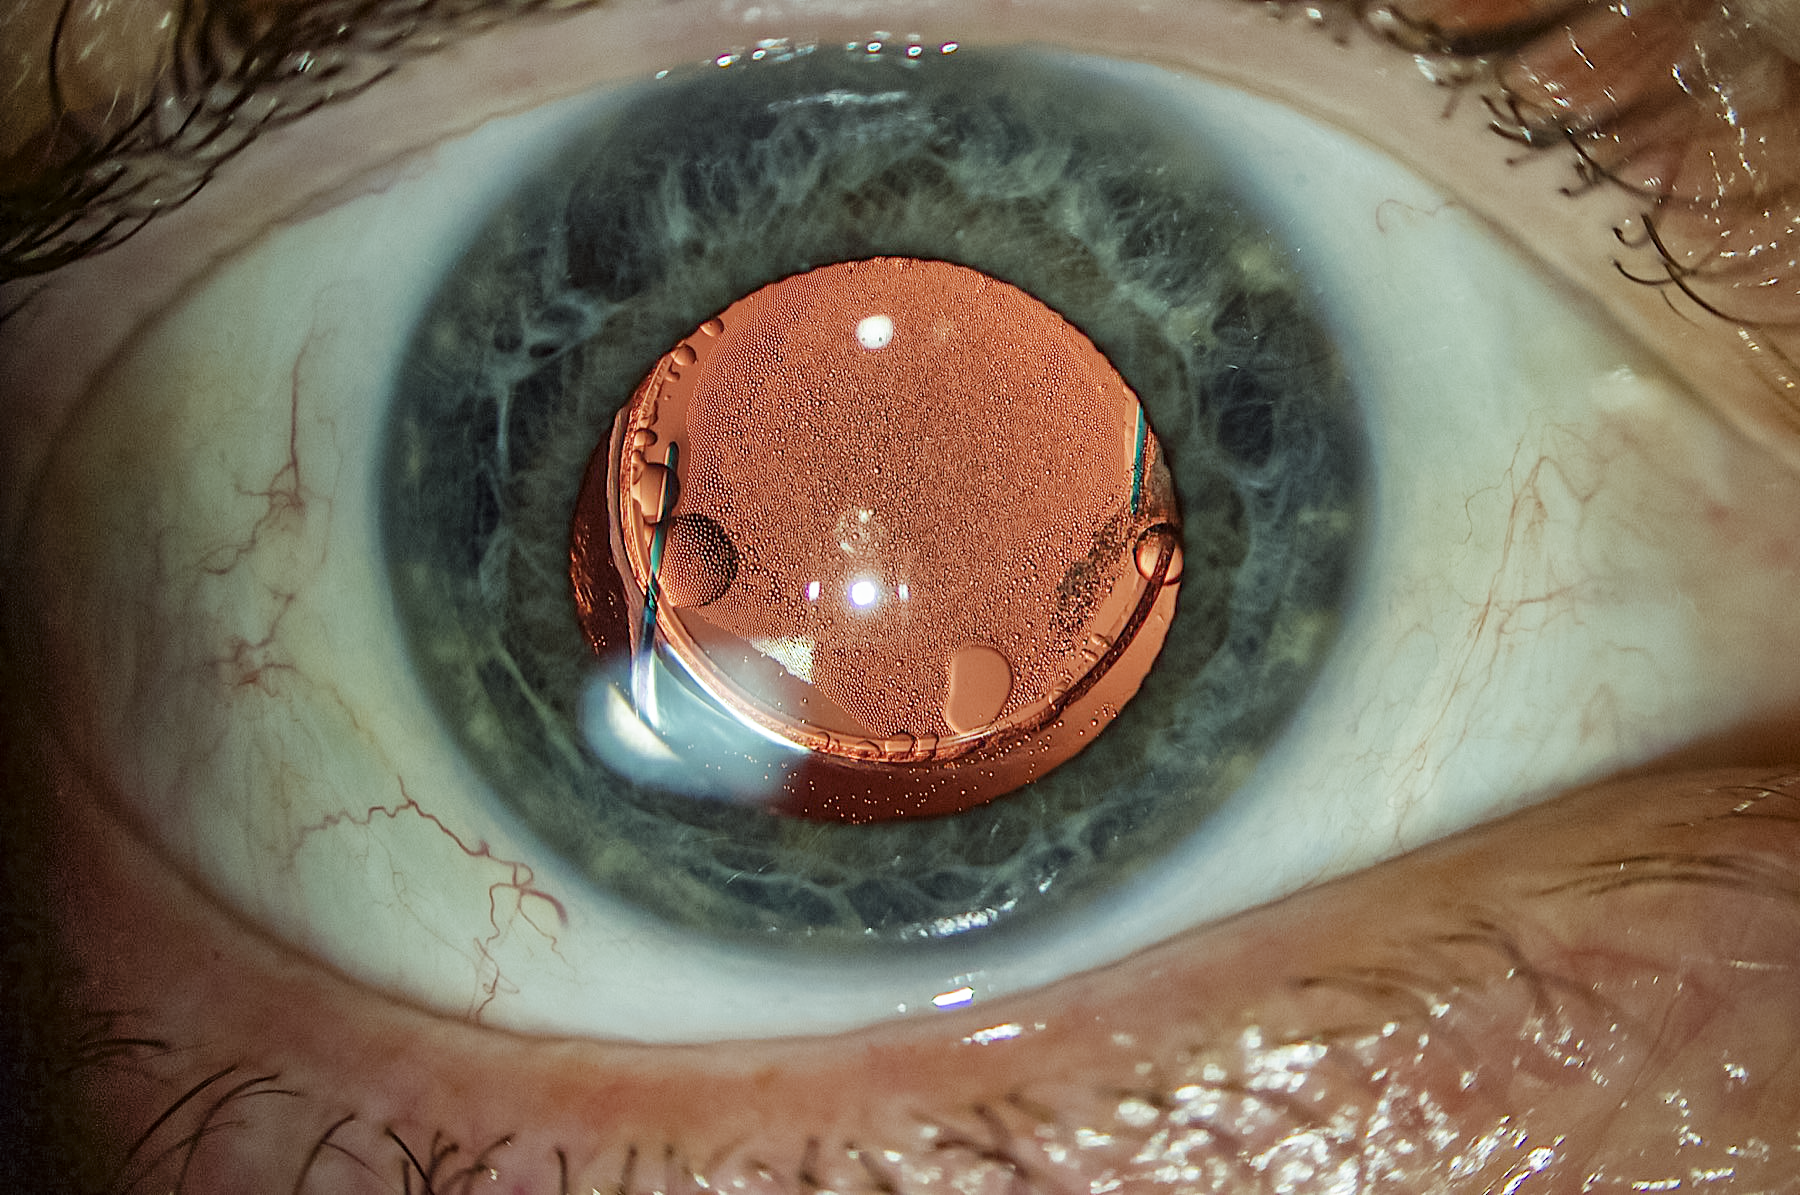 Pseudophakic patient with giant retinal tear requiring silicone oil tamponade. The oil that was adherent to the PCIOL after removal from the vitreous cavity was easily aspirated from the IOL and capsular bag. 